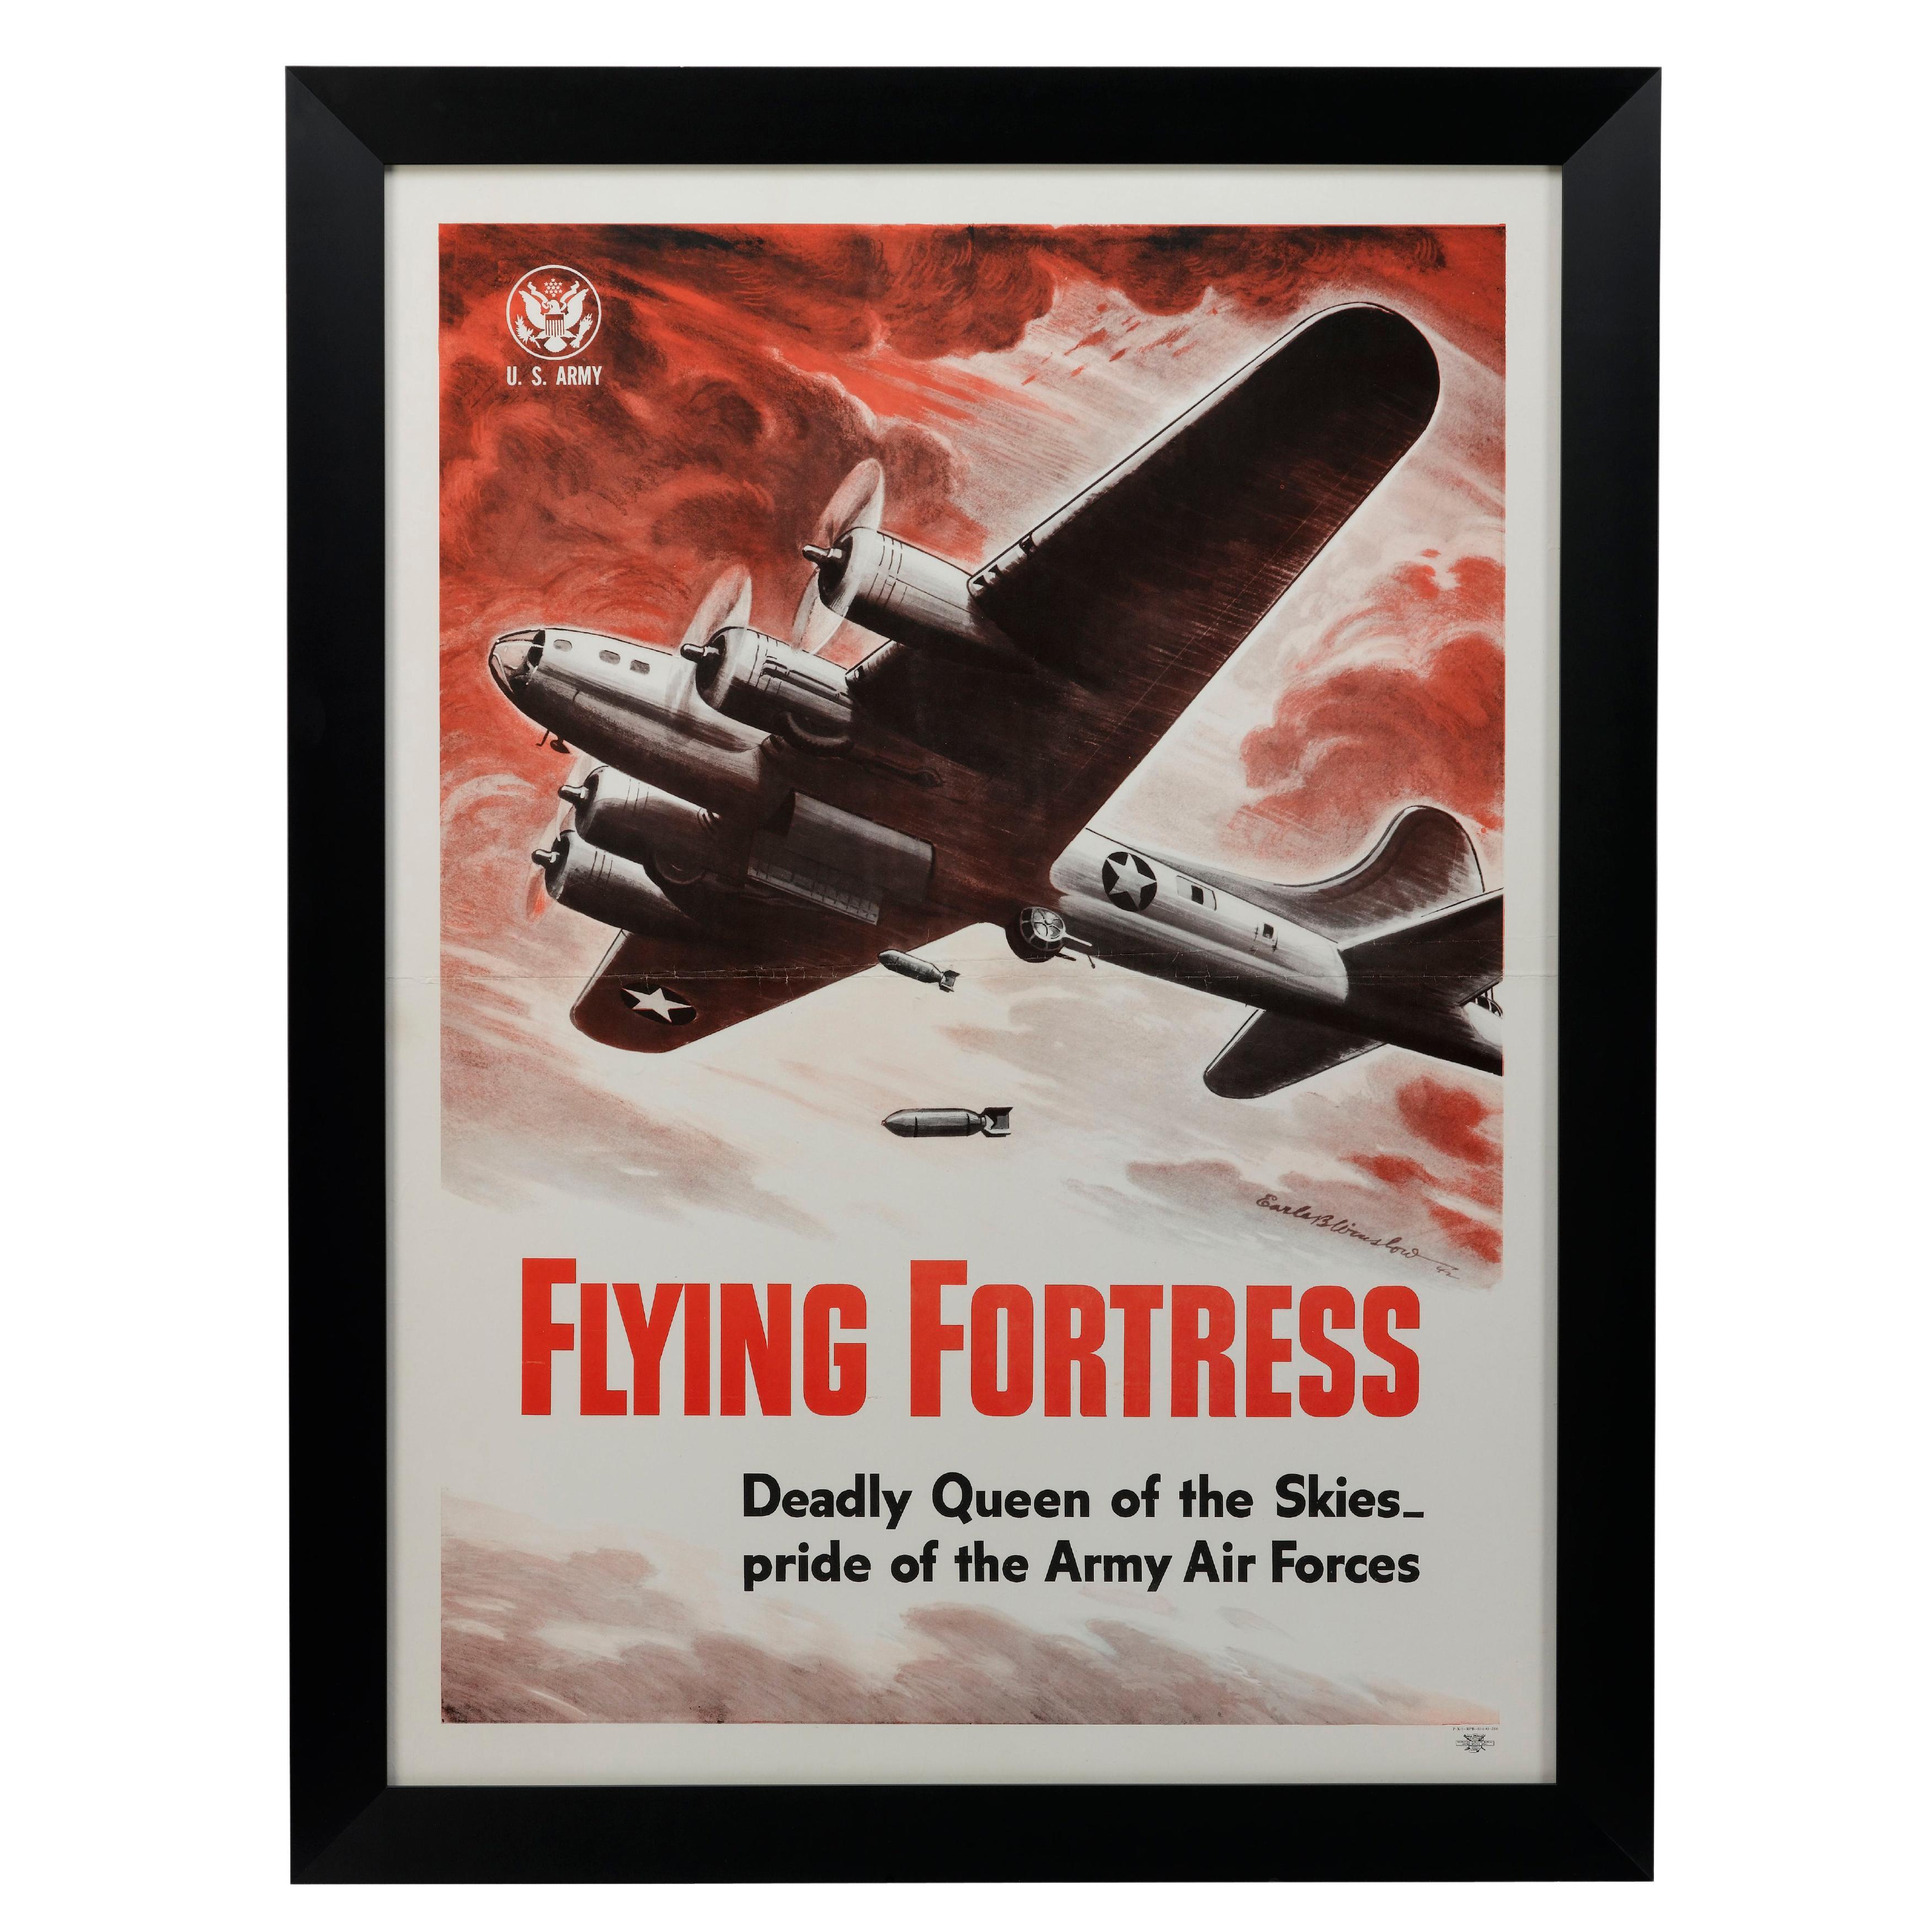 "Flying Fortress. Deadly Queen of the Skies" Vintage WWII Poster, 1943